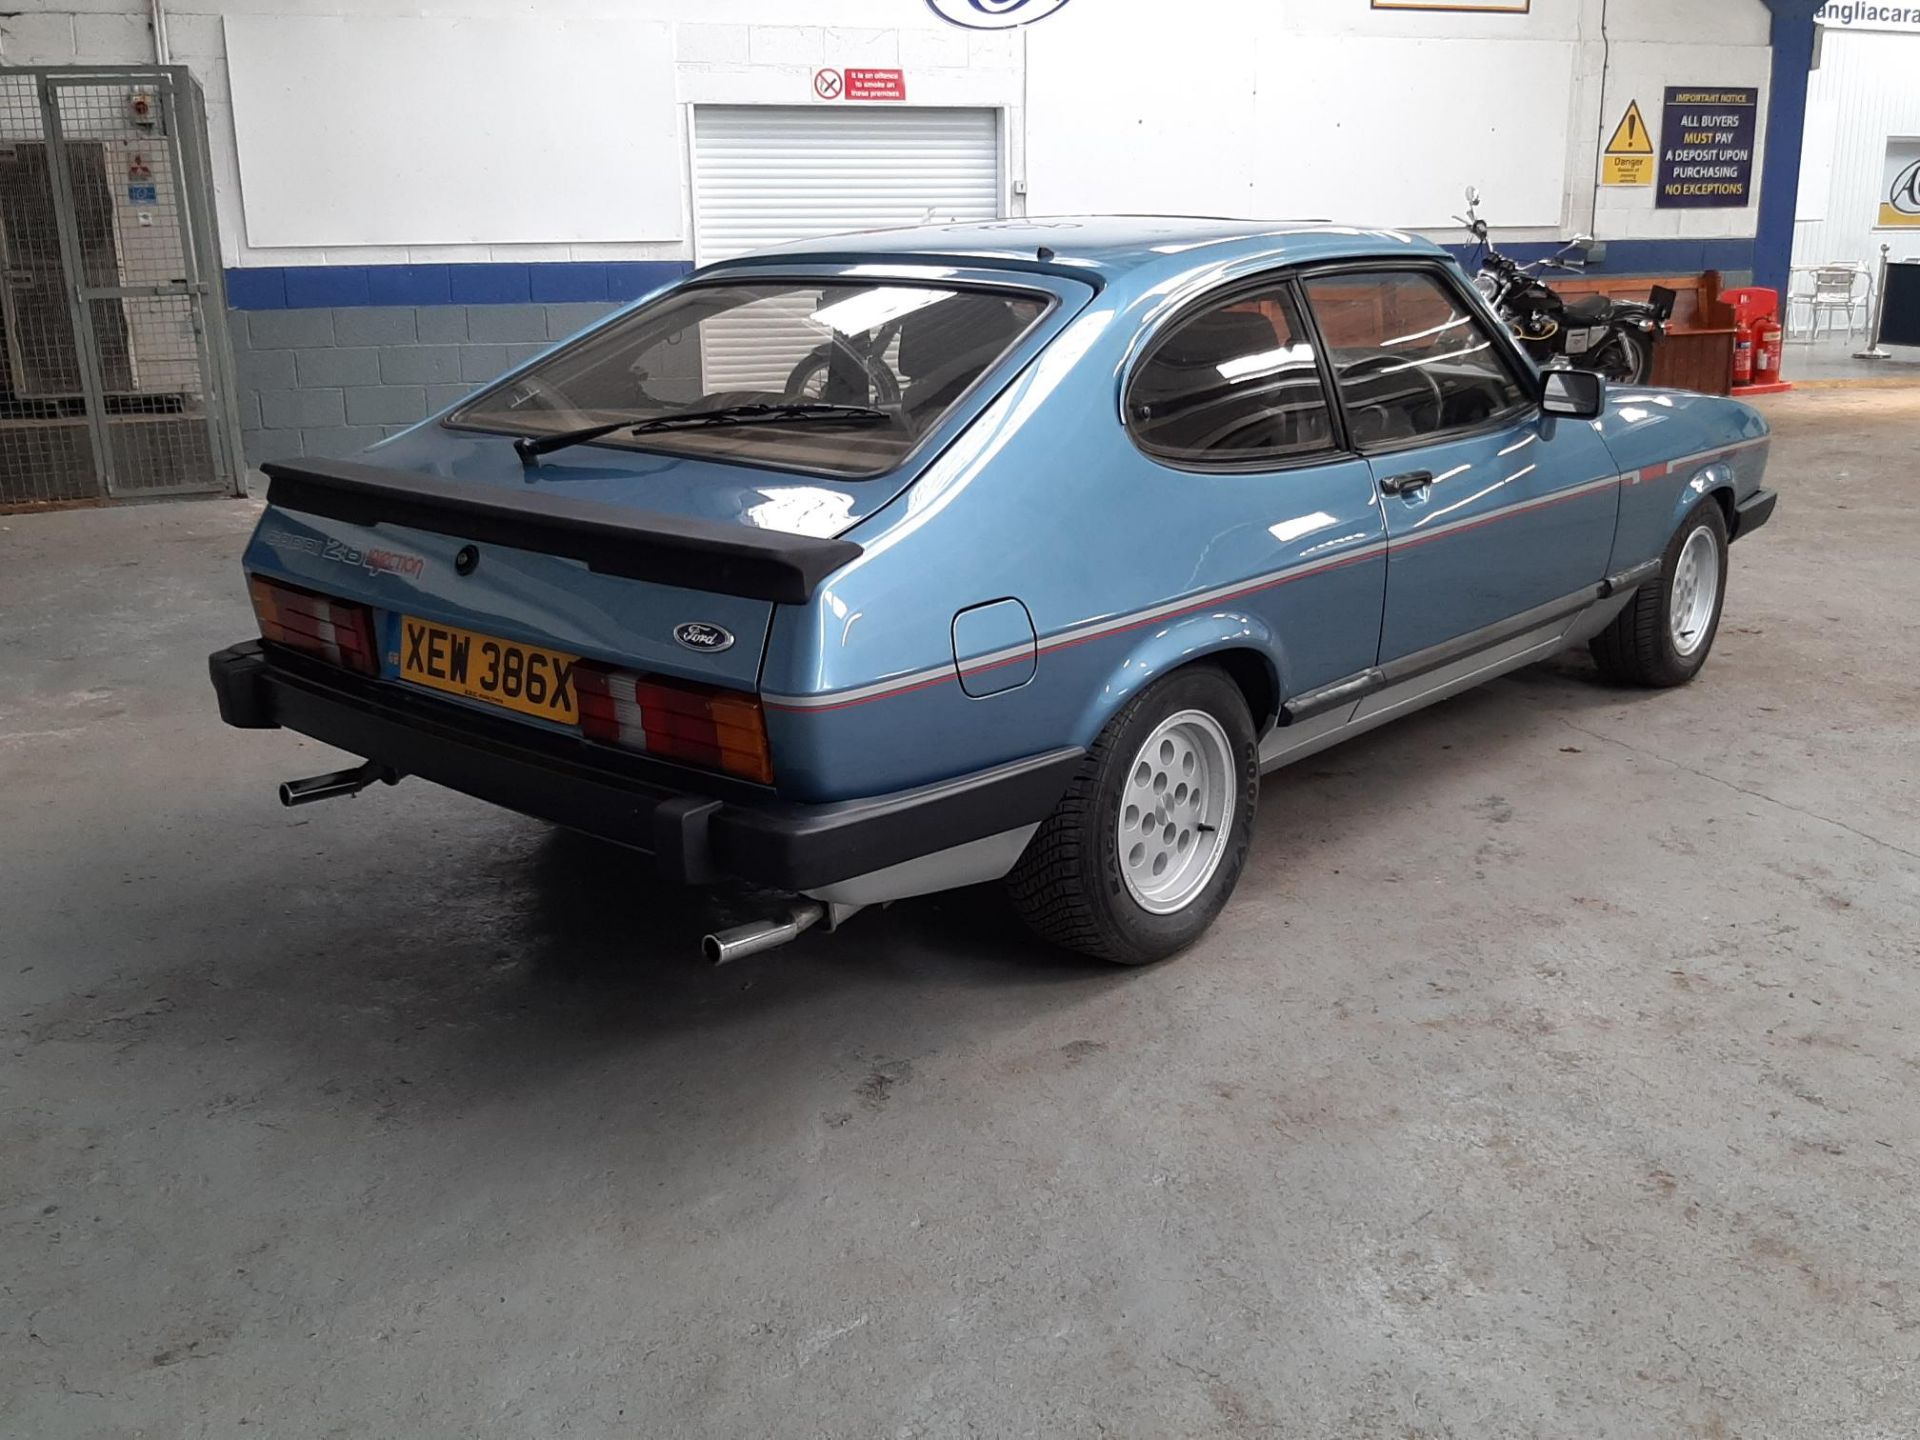 1982 Ford Capri 2.8 Injection - Image 7 of 23